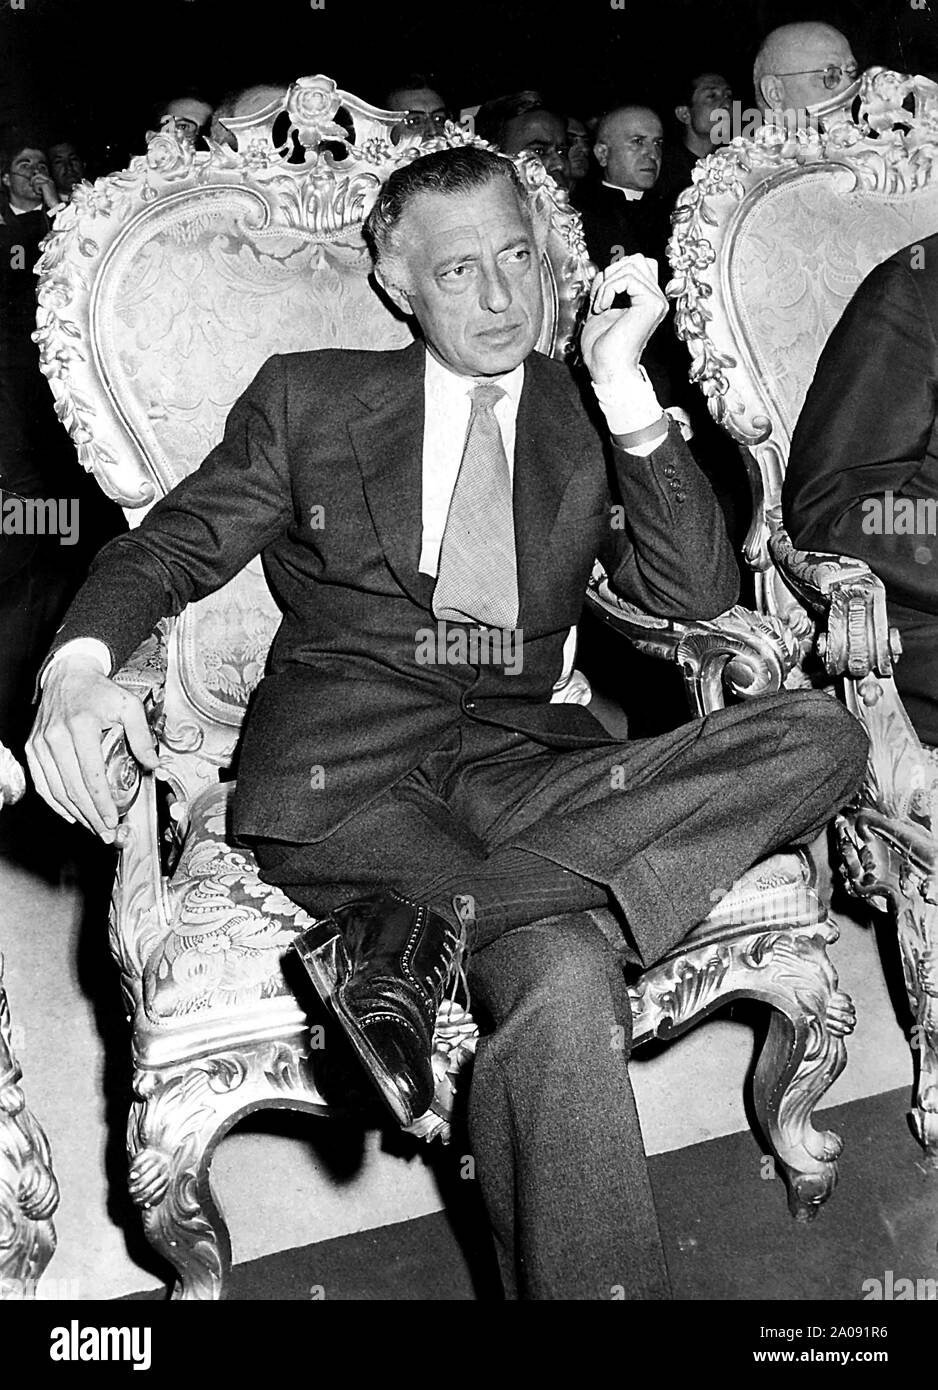 1970, Torino, Italy: Industrialist GIANNI AGNELLI President and founder of Fiat the Italian motor car company, c1970. In 1970, Fiat Automobiles employed more than 100,000 in Italy when its production reached the highest number, 1.4 million cars, in that country. Credit: Globe Photos/ZUMAPRESS.com/Alamy Live News Stock Photo